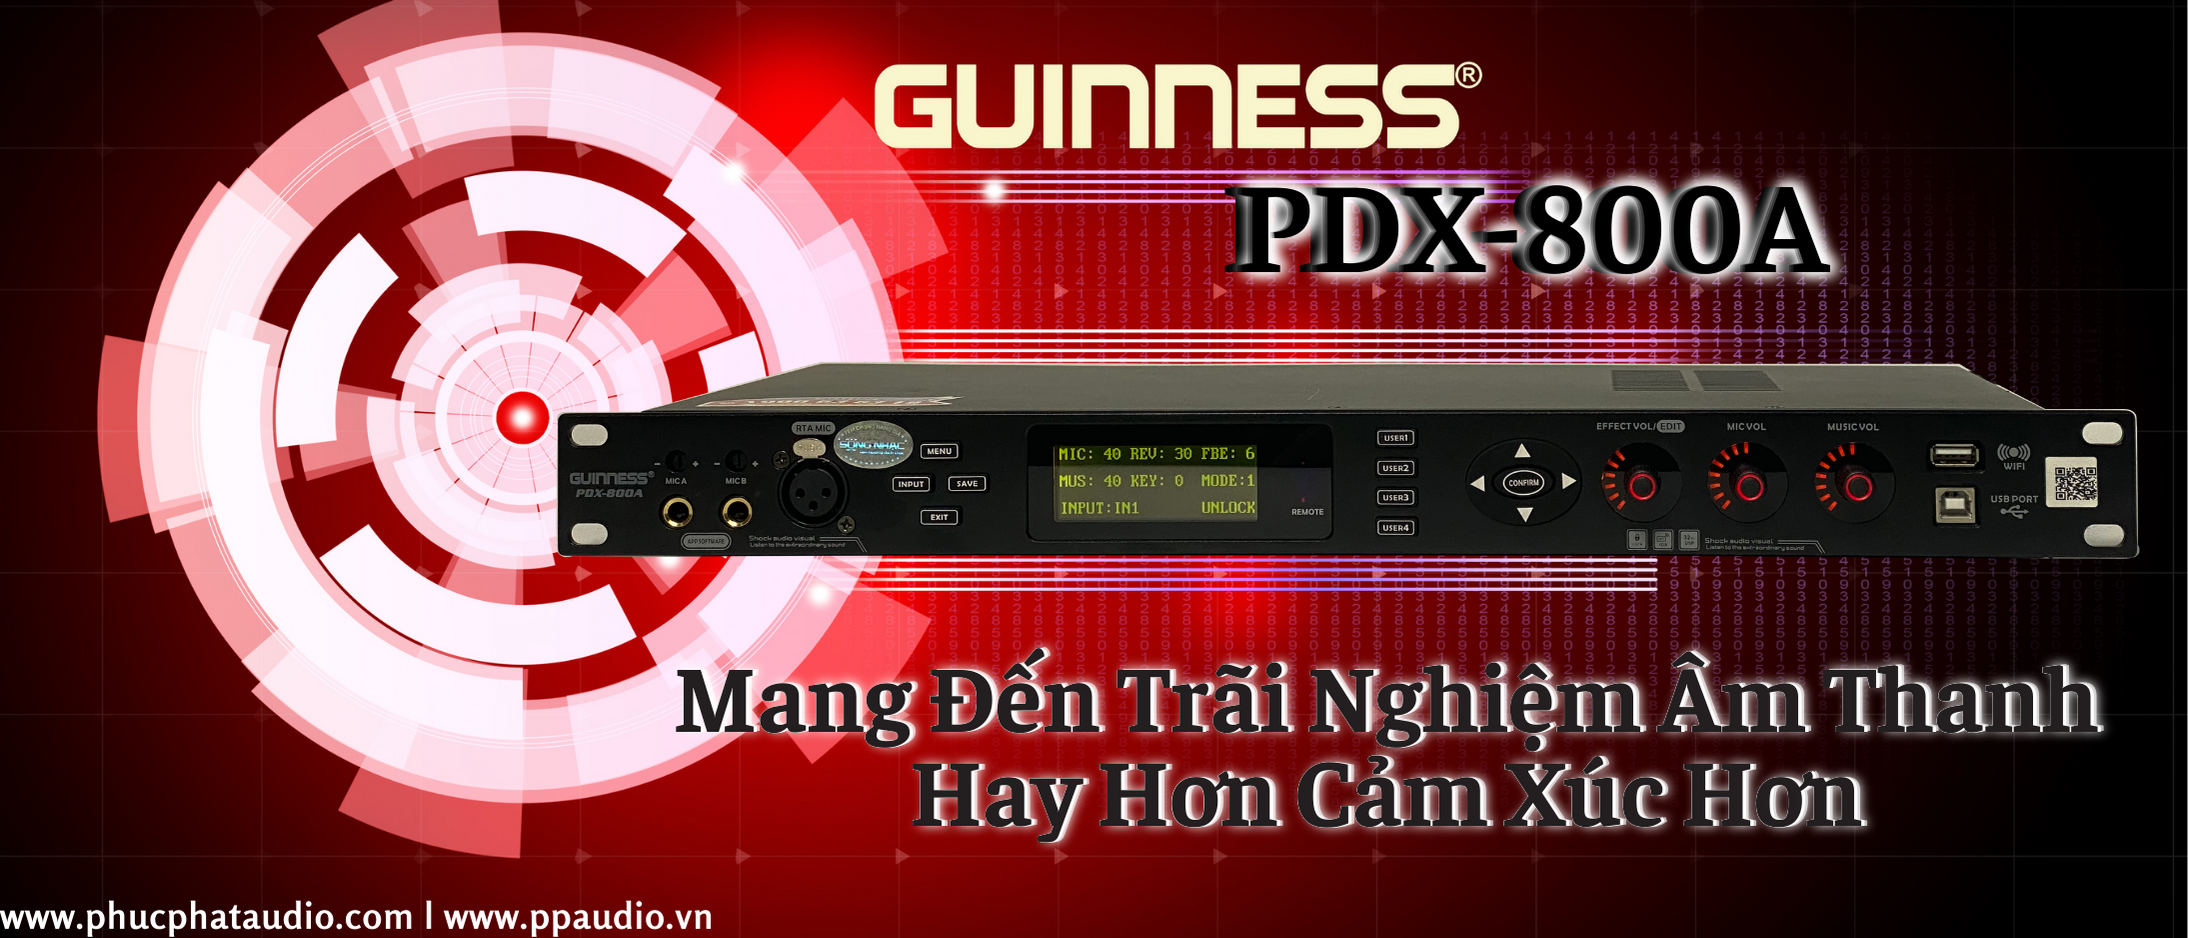 Vang GUINNESS PDX-800A